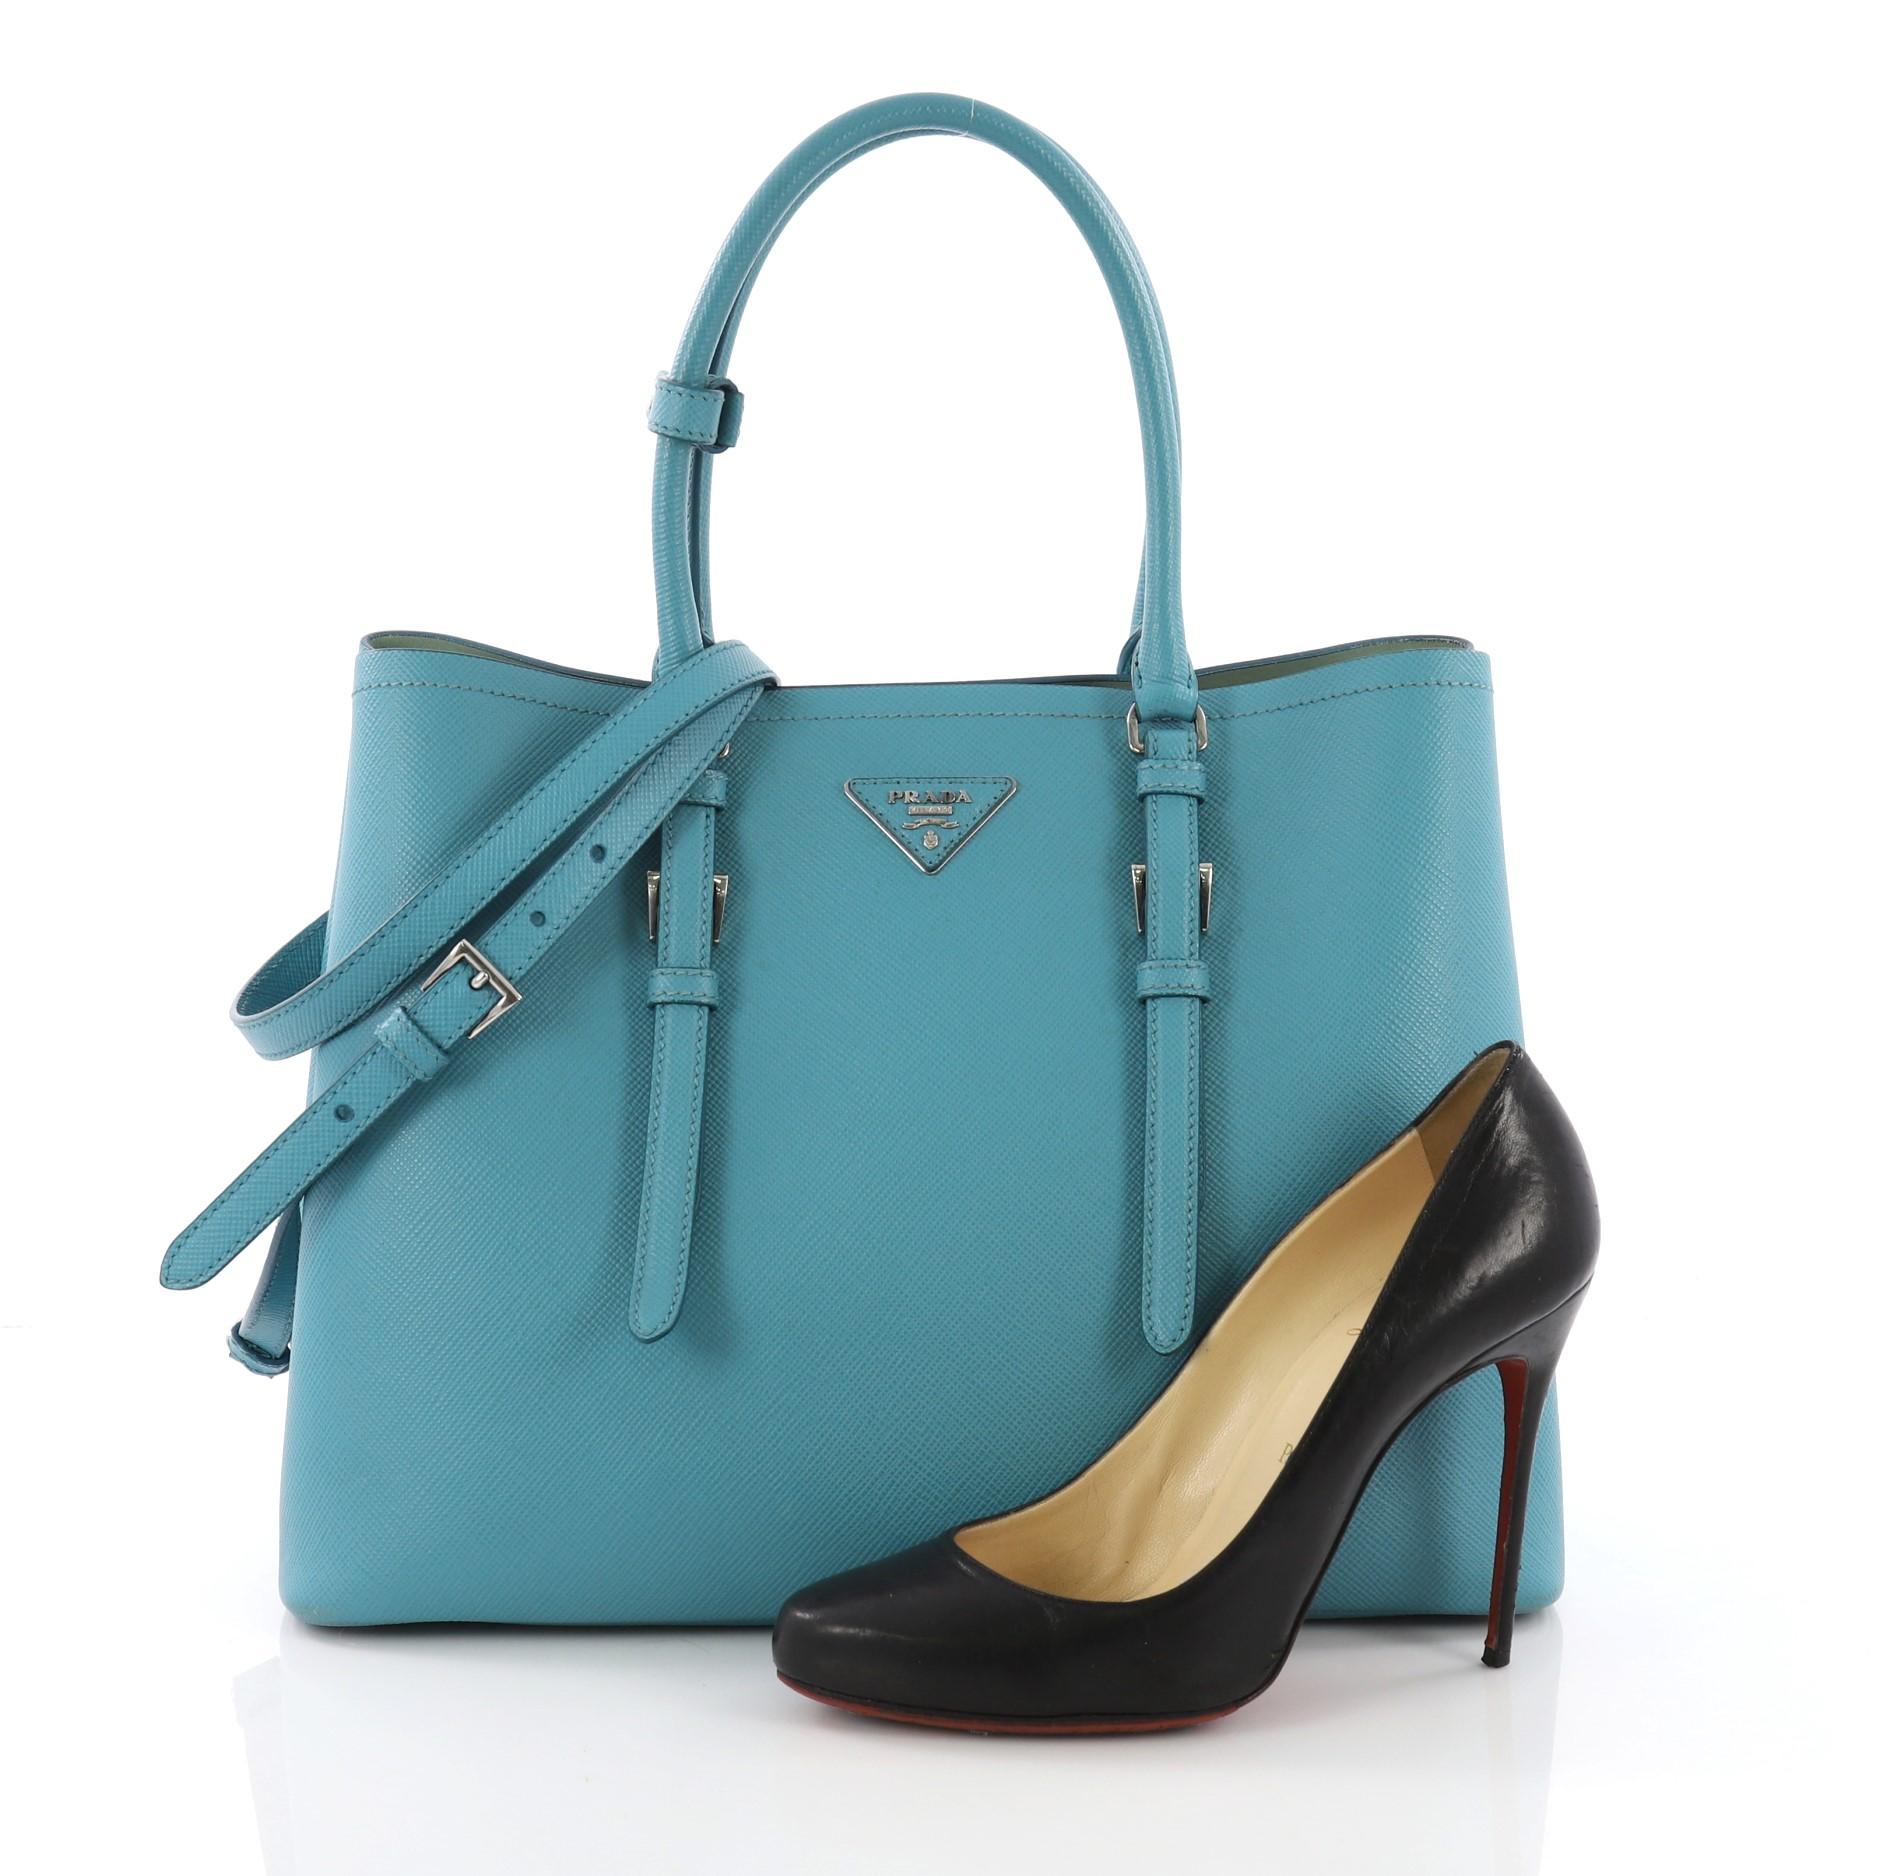 This Prada Cuir Covered Strap Double Tote Saffiano Leather Medium, crafted from blue saffiano leather, features dual rolled handles with extended belt accents, side snap buttons, and silver-tone hardware. It opens to a green leather interior with